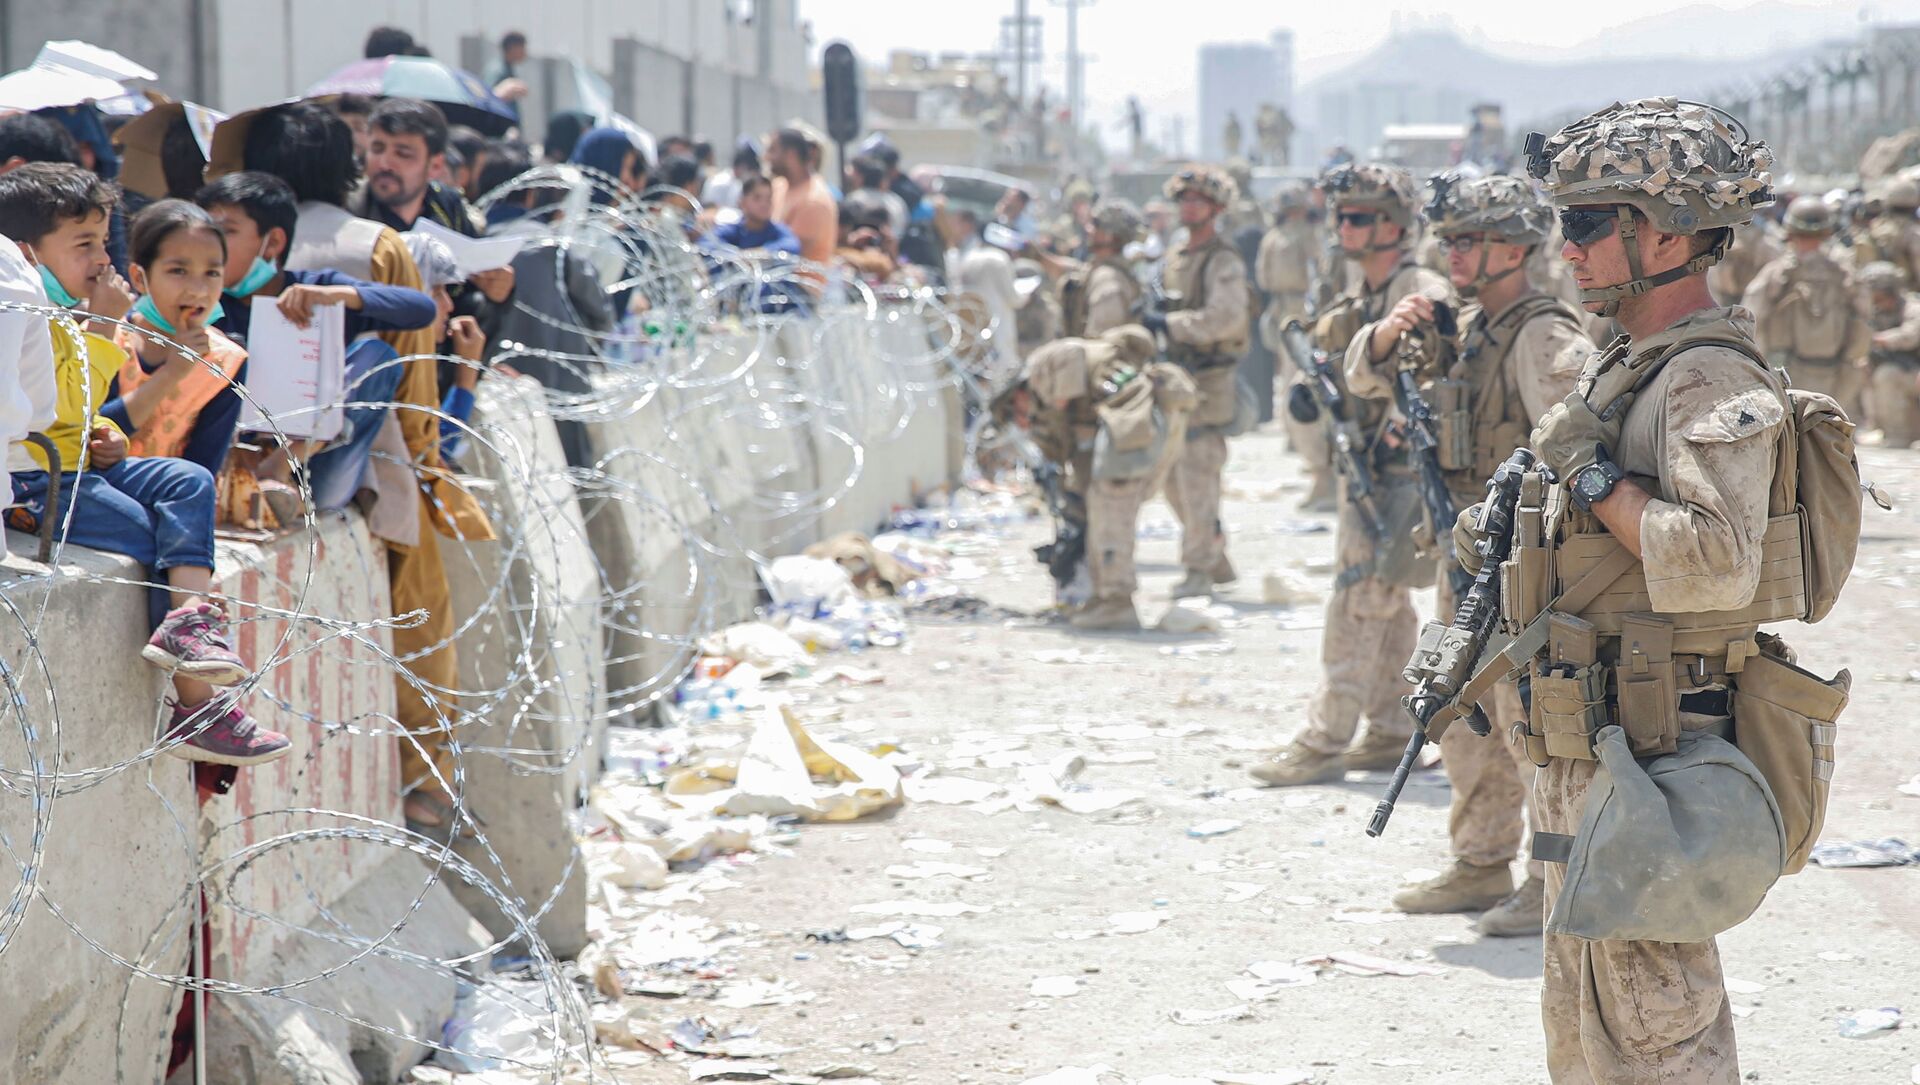 U.S. Marines with Special Purpose Marine Air-Ground Task Force - Crisis Response - Central Command, provide assistance during an evacuation at Hamid Karzai International Airport, in Kabul, Afghanistan, August 20, 2021. - Sputnik International, 1920, 21.08.2021